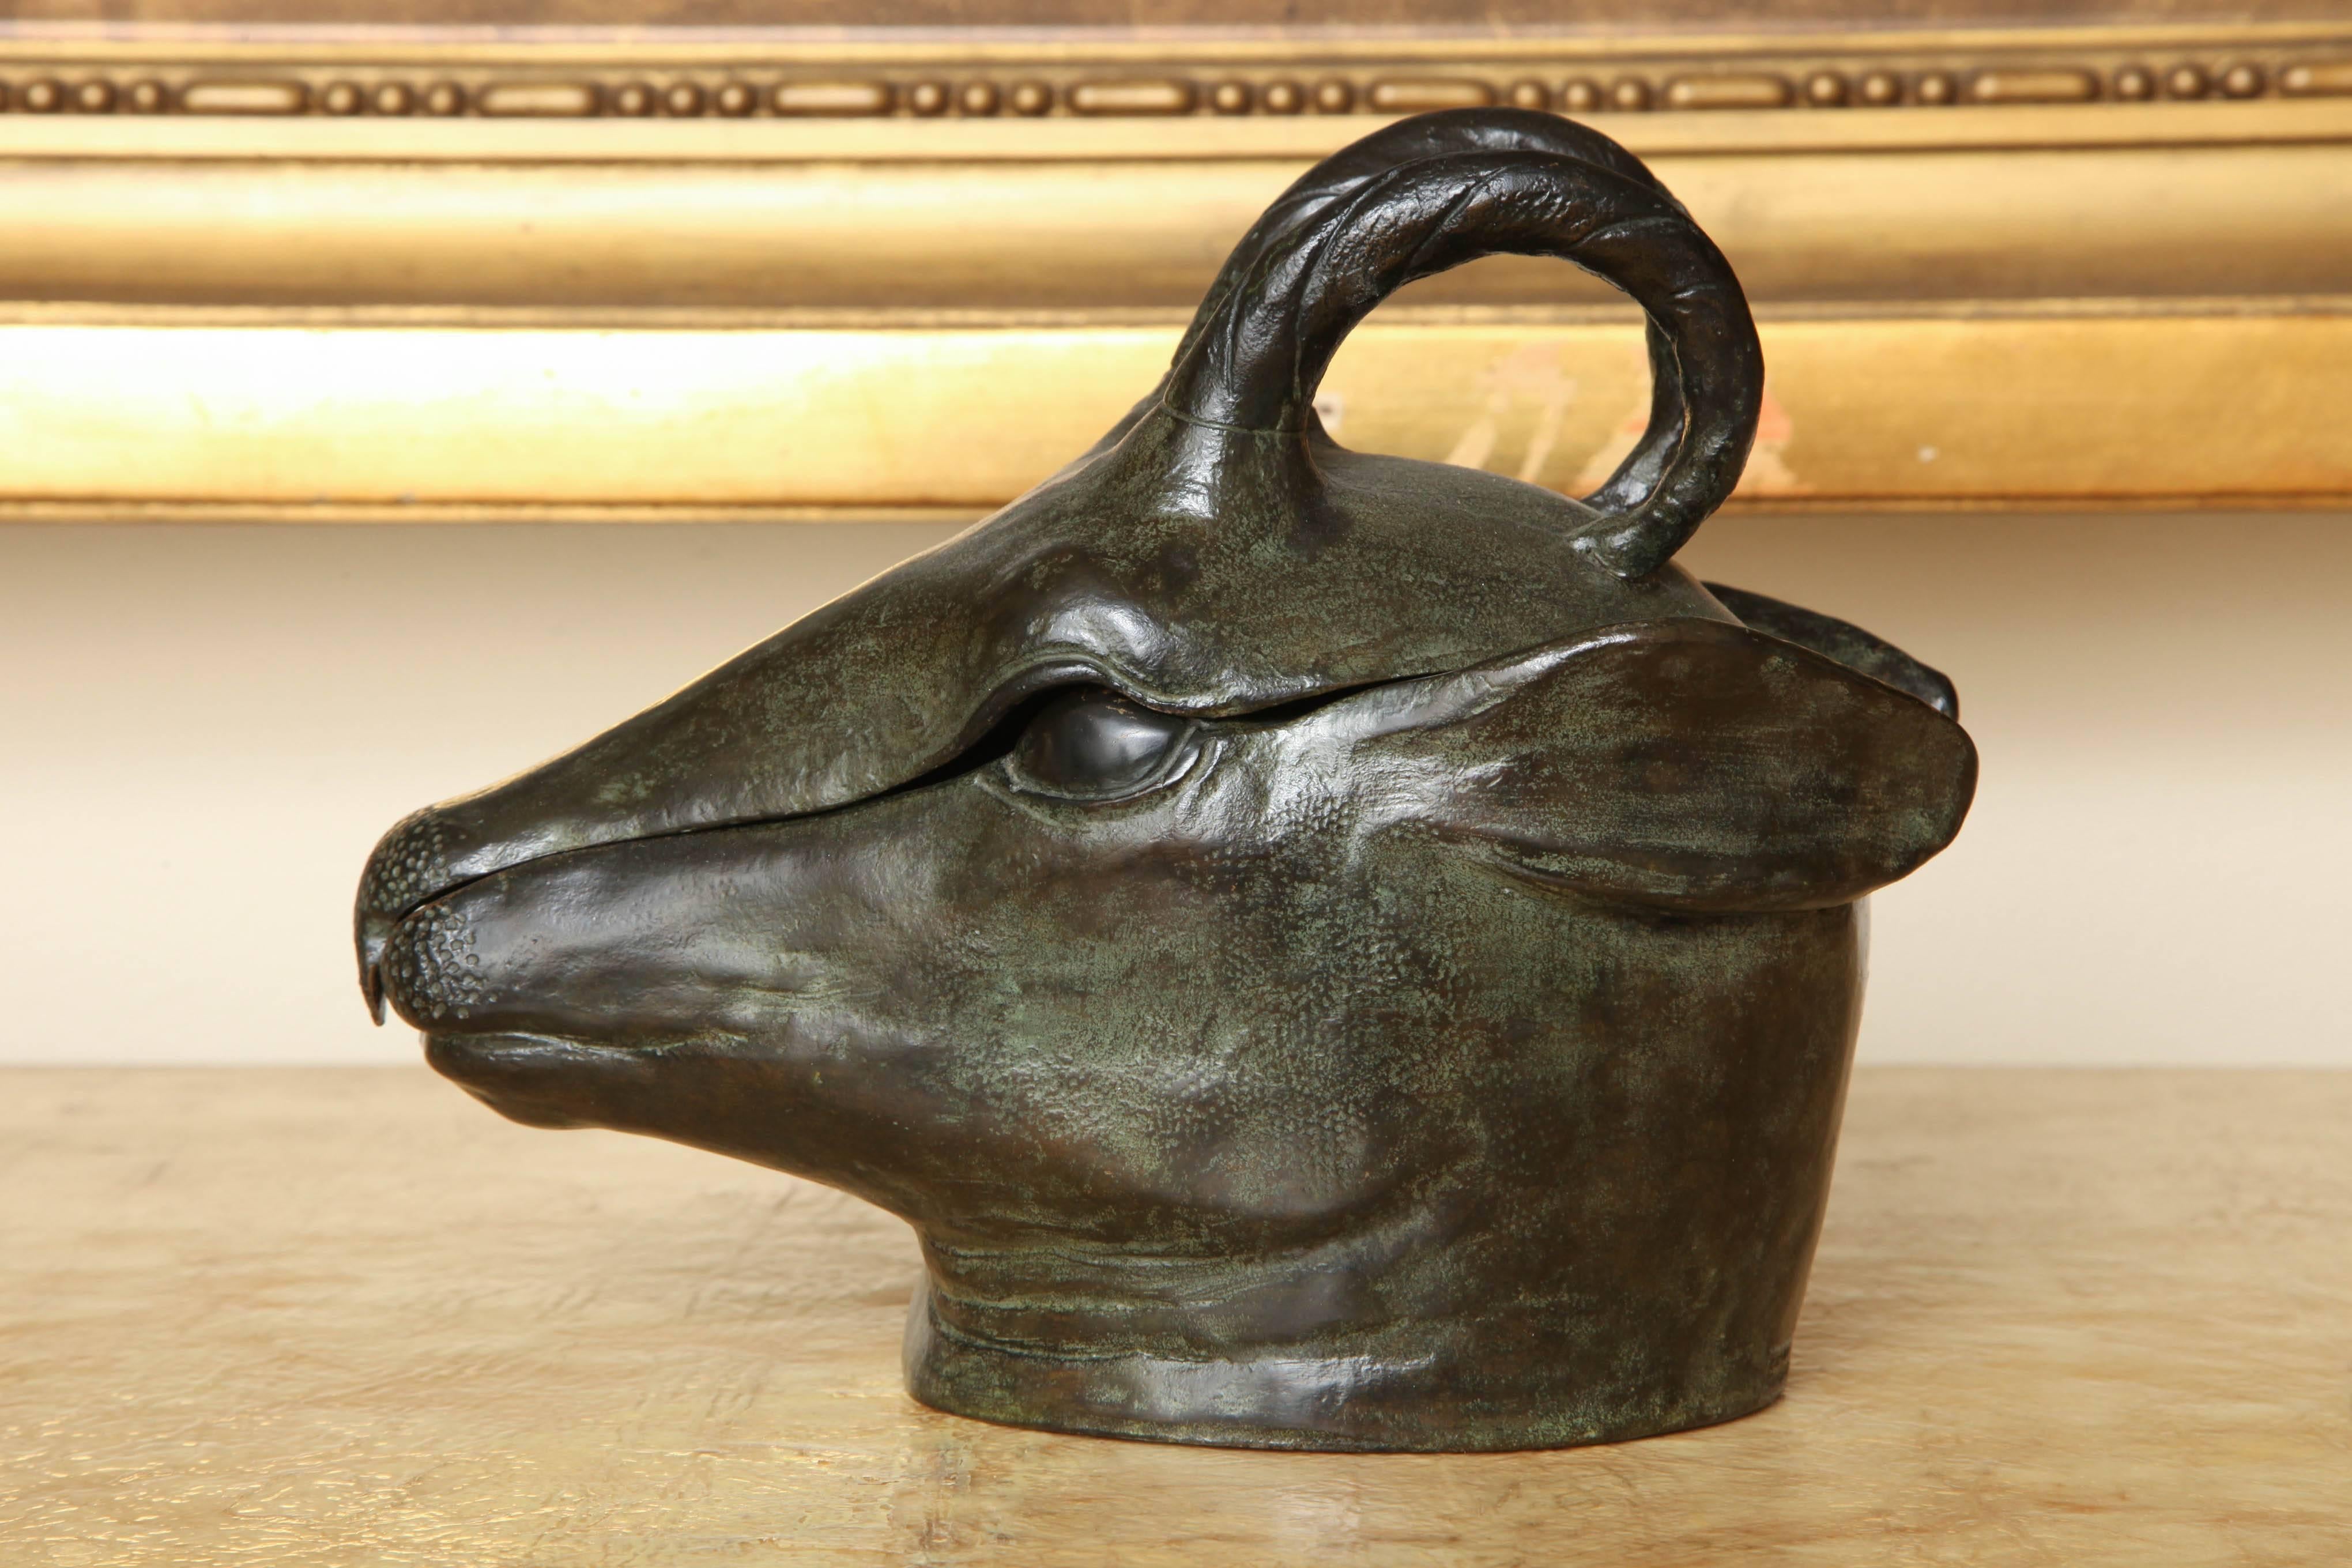 With removable lid. Signed and numbered 3/8. Bearing Clementi foundry mark.

Paul Simon (French, 1892–1975) was celebrated for his animal sculptures. He trained at the Ecole des Beaux Arts, initially focusing on architecture. By the end of the